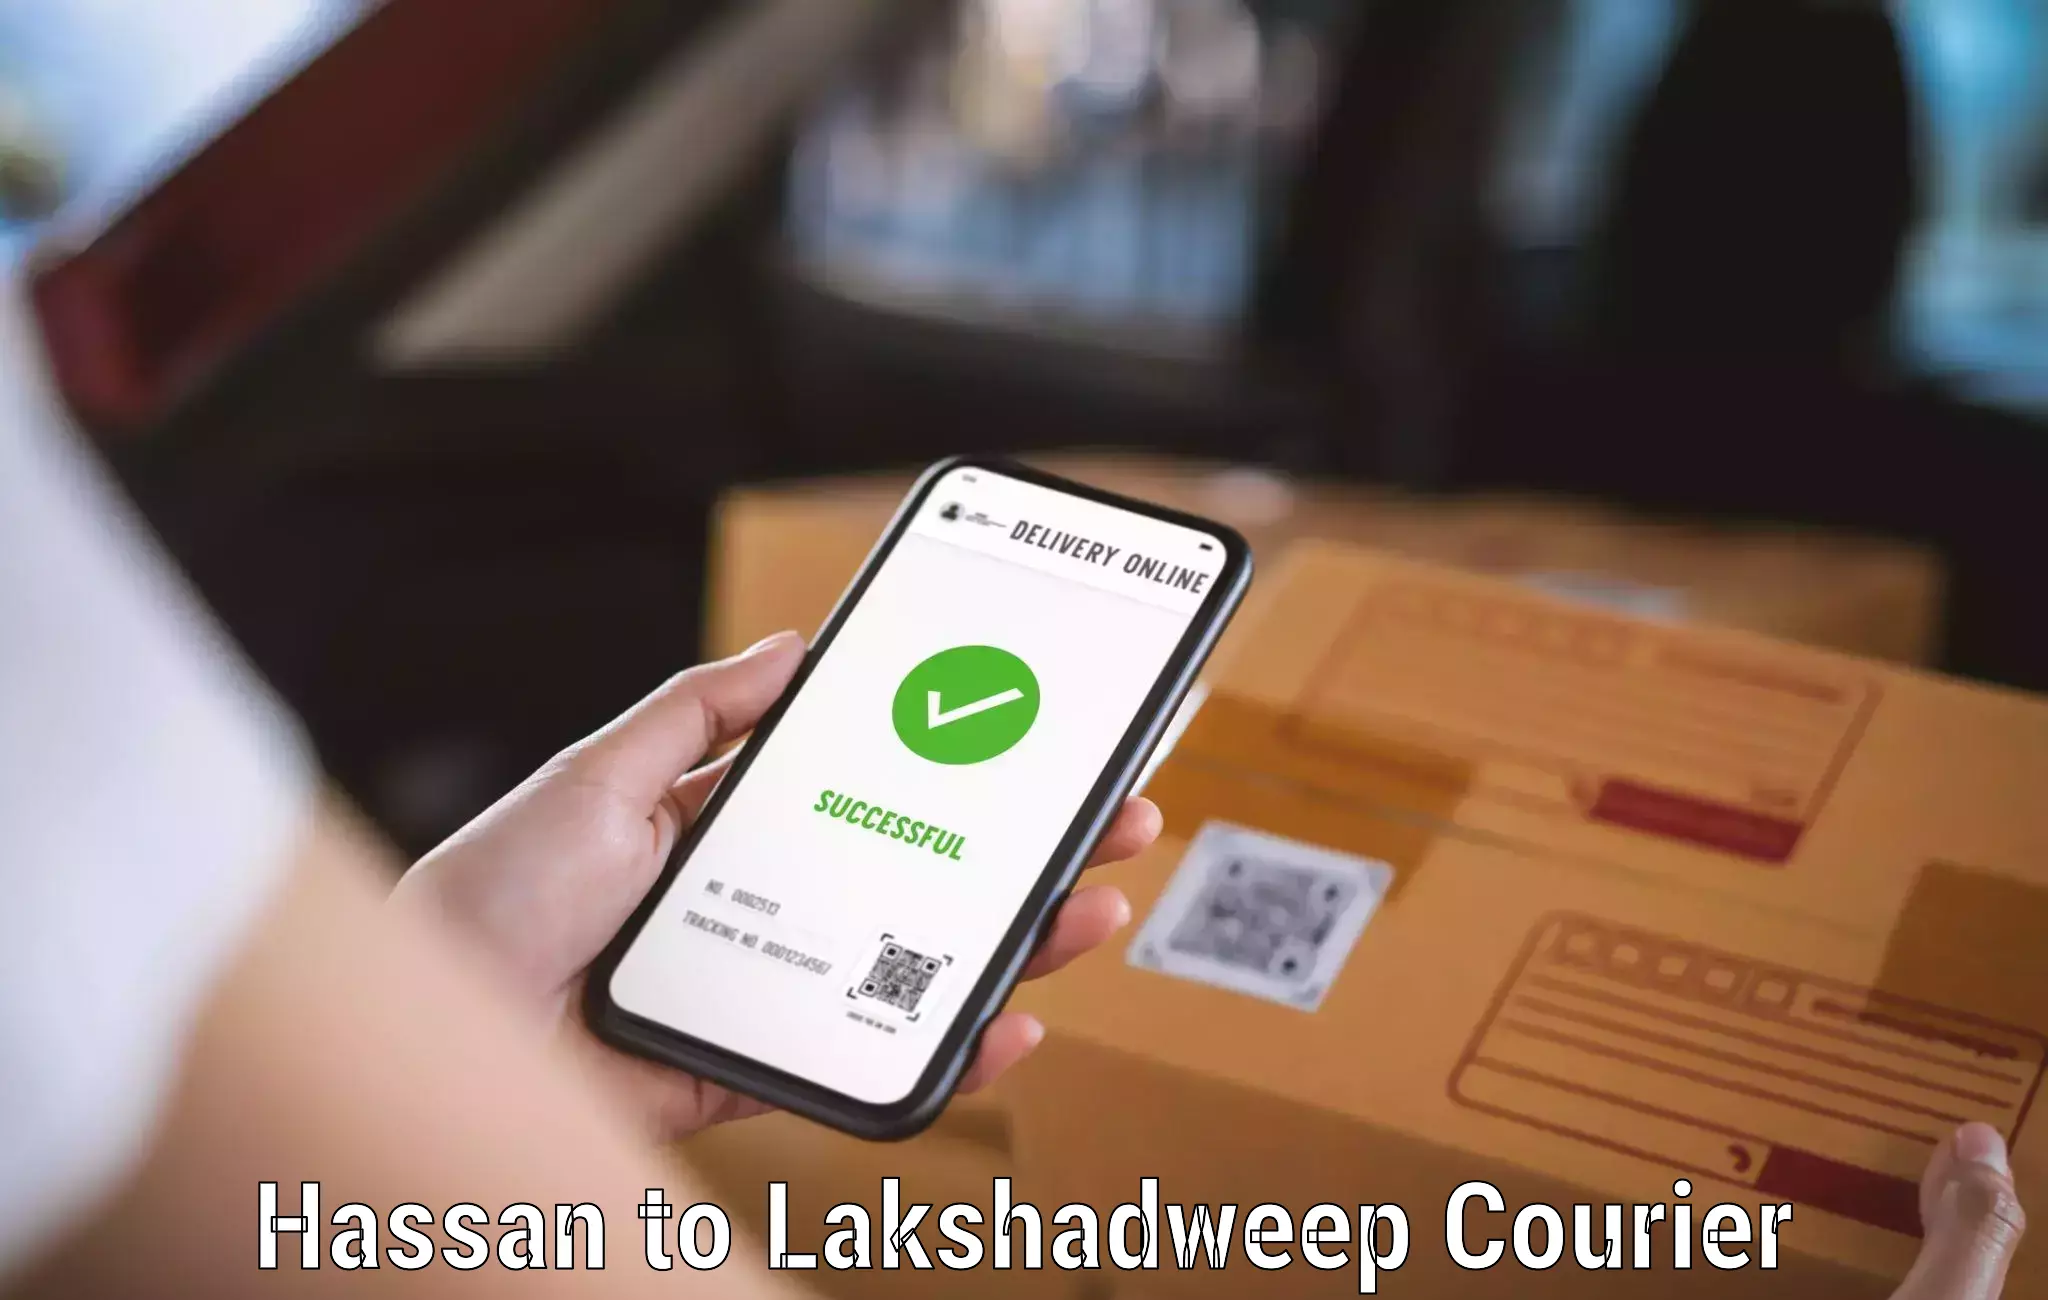 24-hour courier service Hassan to Lakshadweep